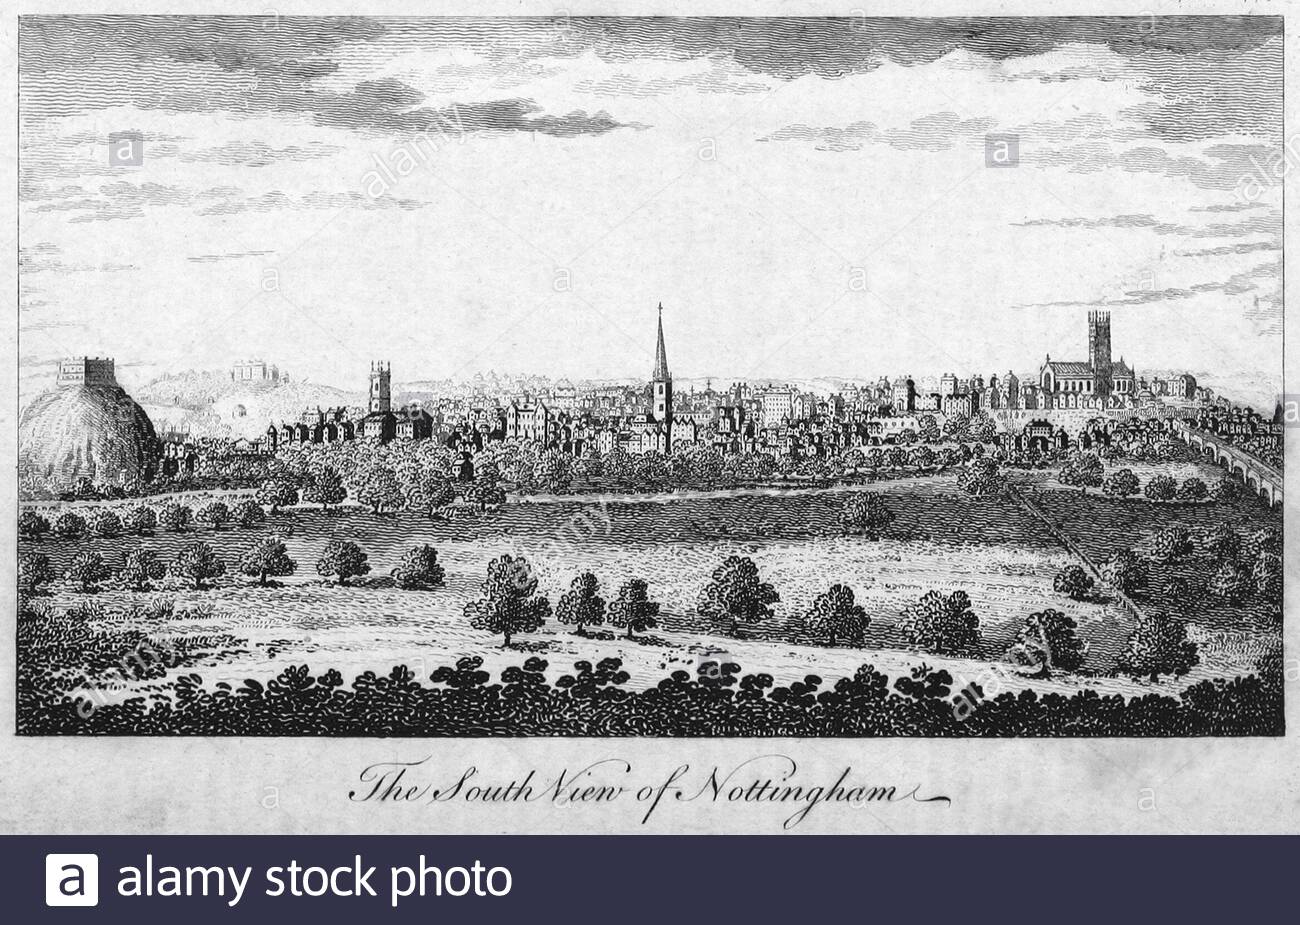 South view of Nottingham, England, vintage illustration from 1804 Stock Photo